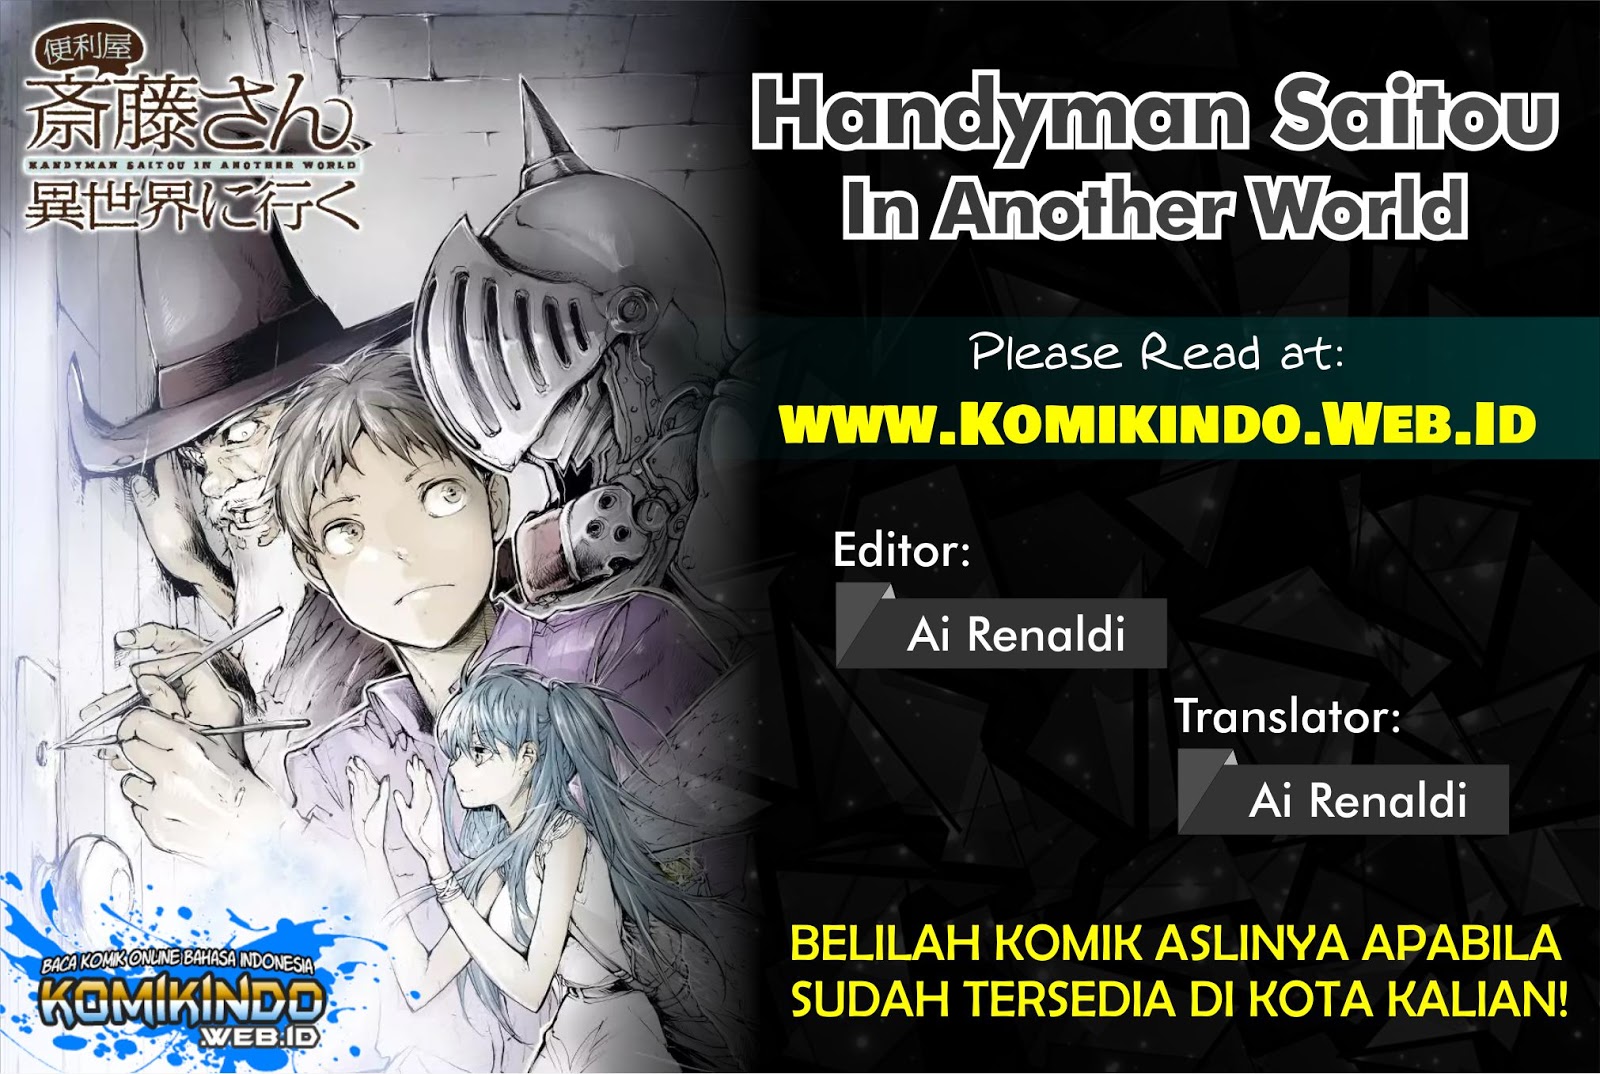 Handyman Saitou In Another World Chapter 04.5